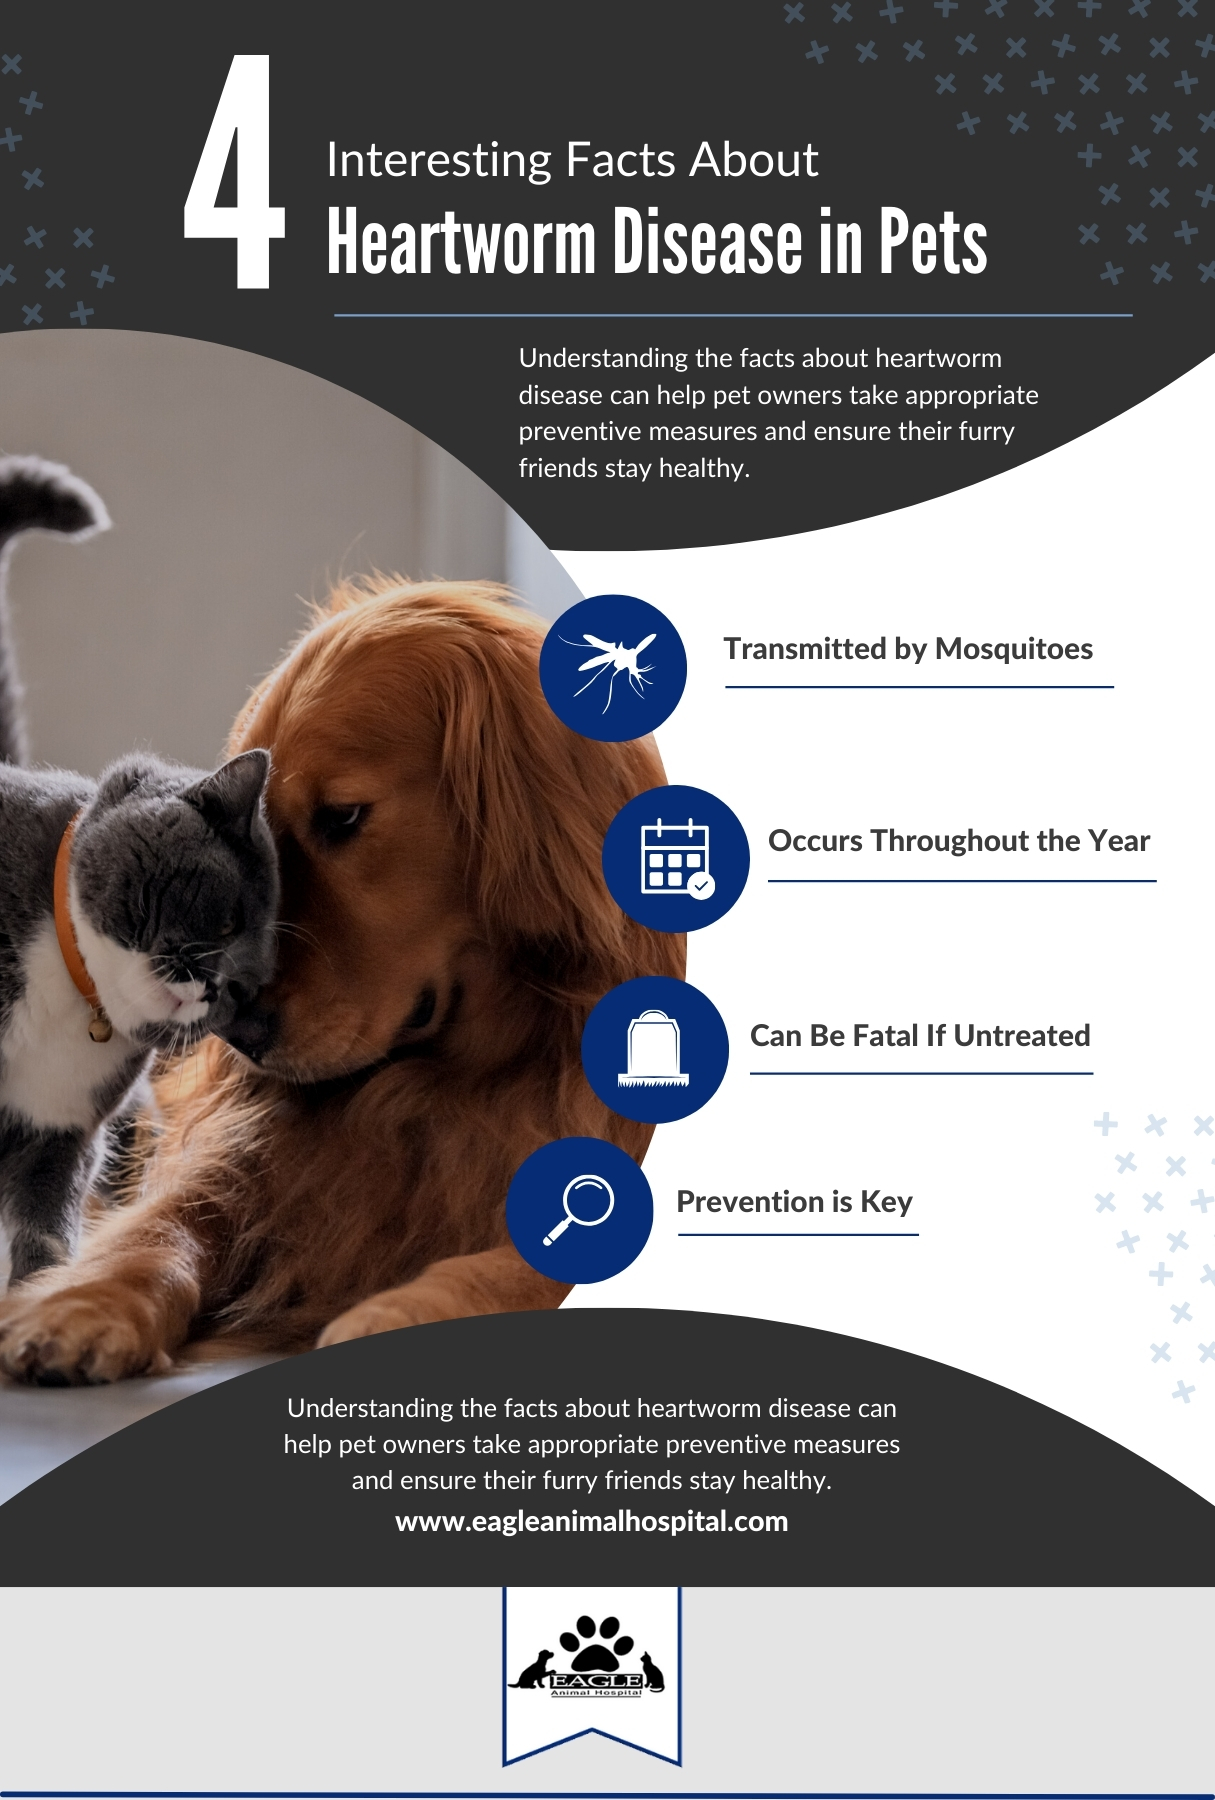 4 Interesting Facts About Heartworm Disease in Pets Infographic